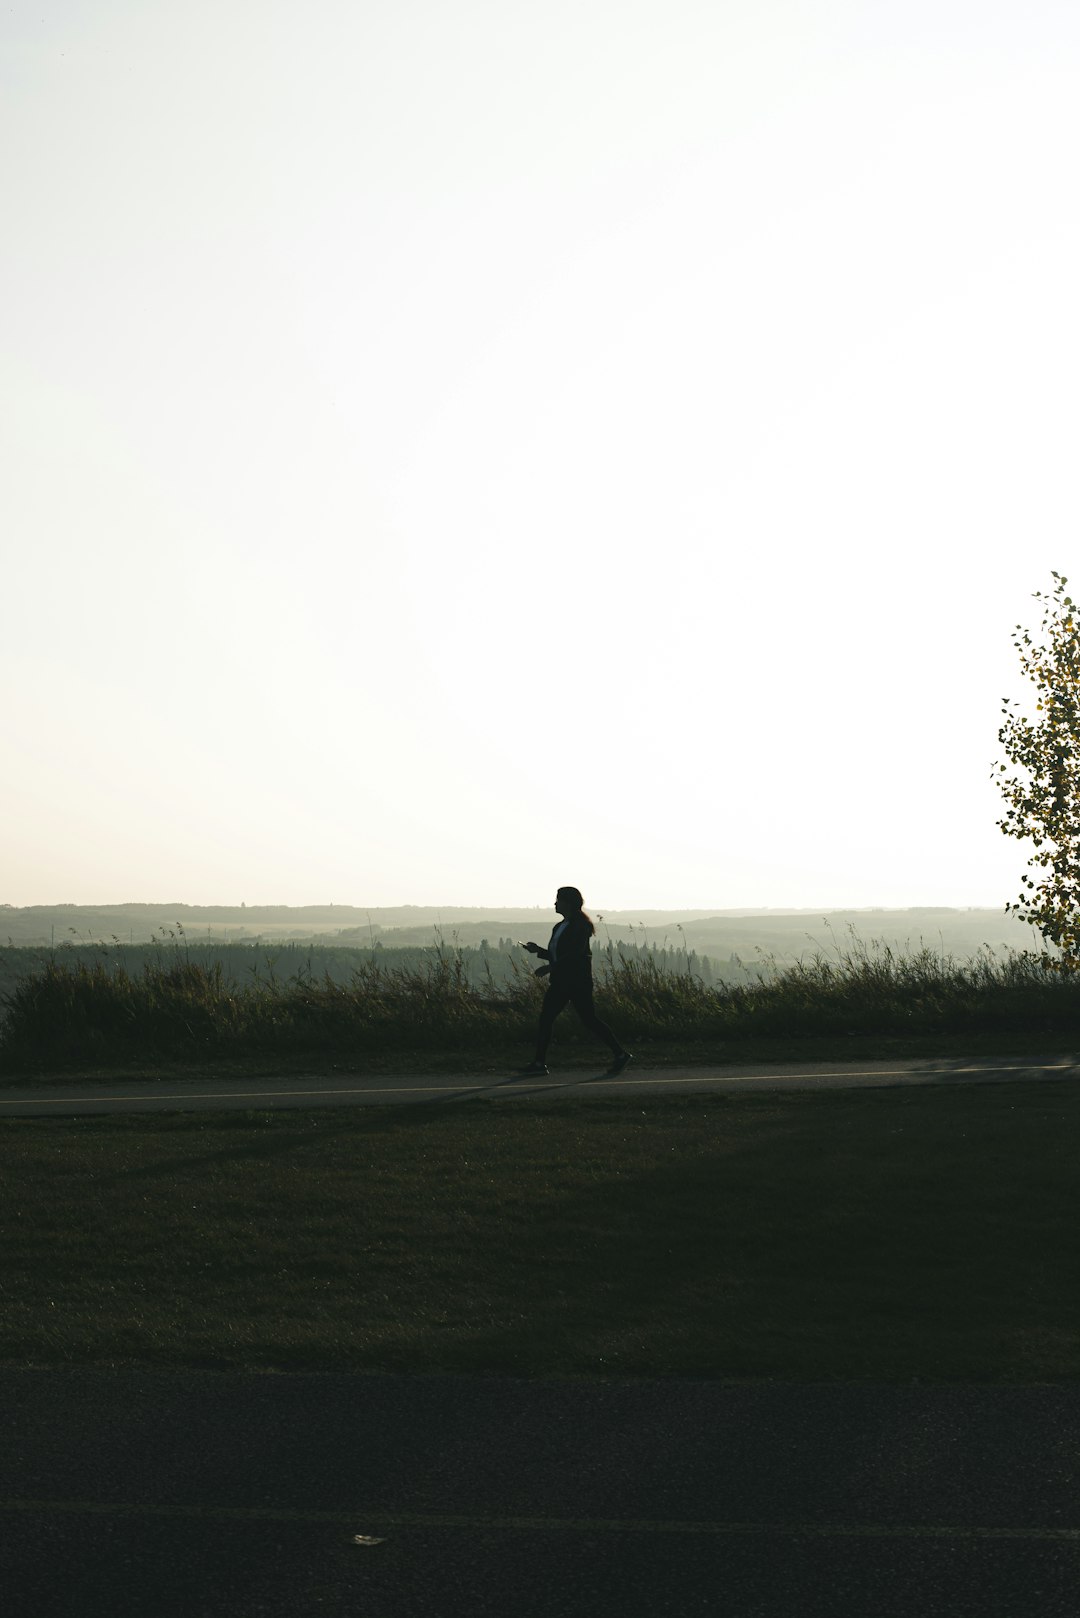 silhouette of person walking on road during daytime